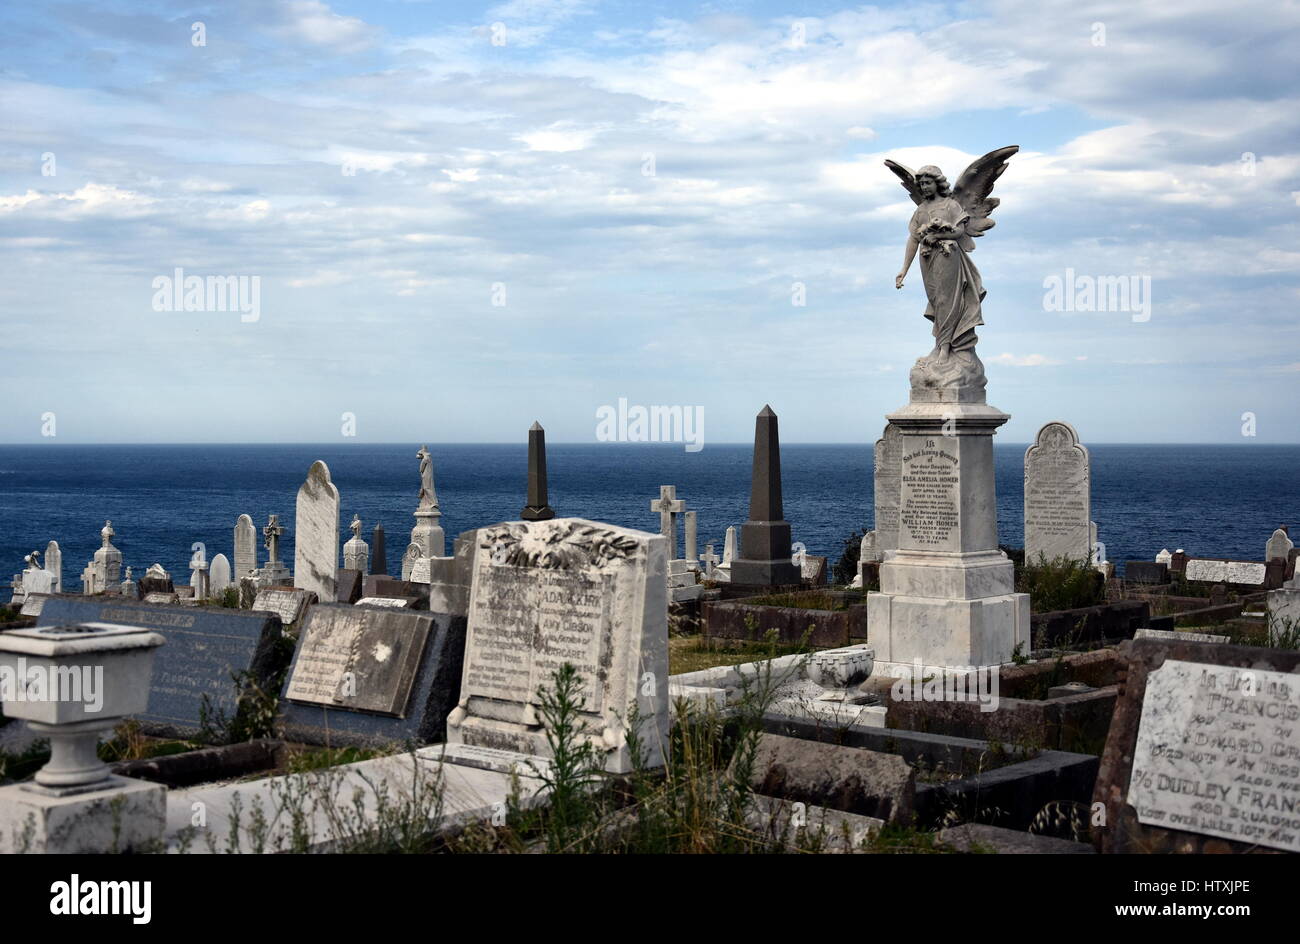 Waverley Cemetery is a state heritage listed cemetery in an iconic location in Sydney. It is noted for its largely intact Victorian and Edwardian monu Stock Photo